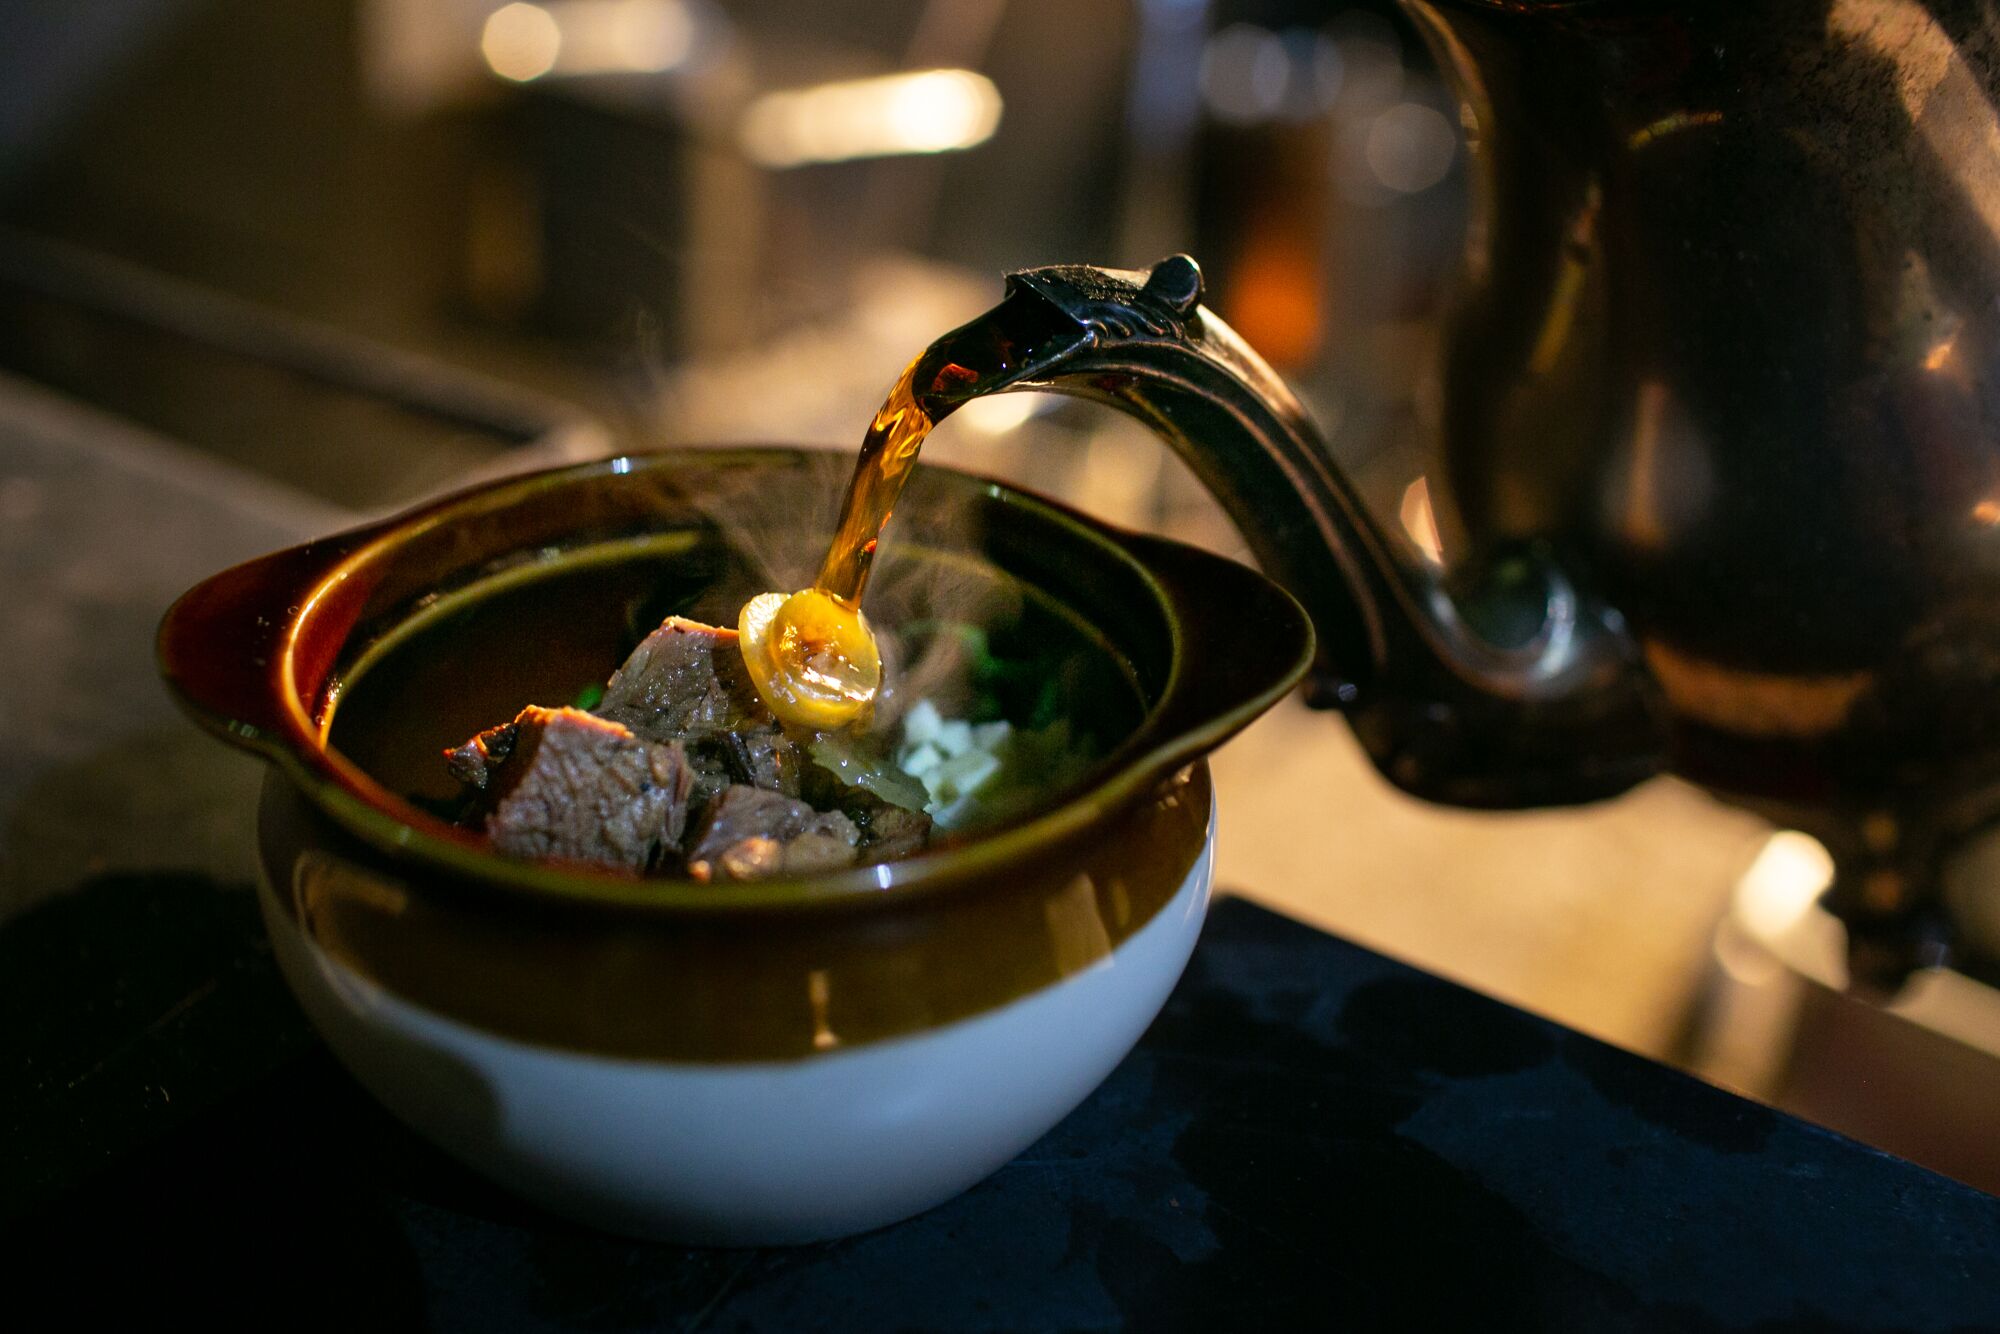 Beef broth is poured into a bowl of pepper pot, a stew made of beef, vegetables and peppers.